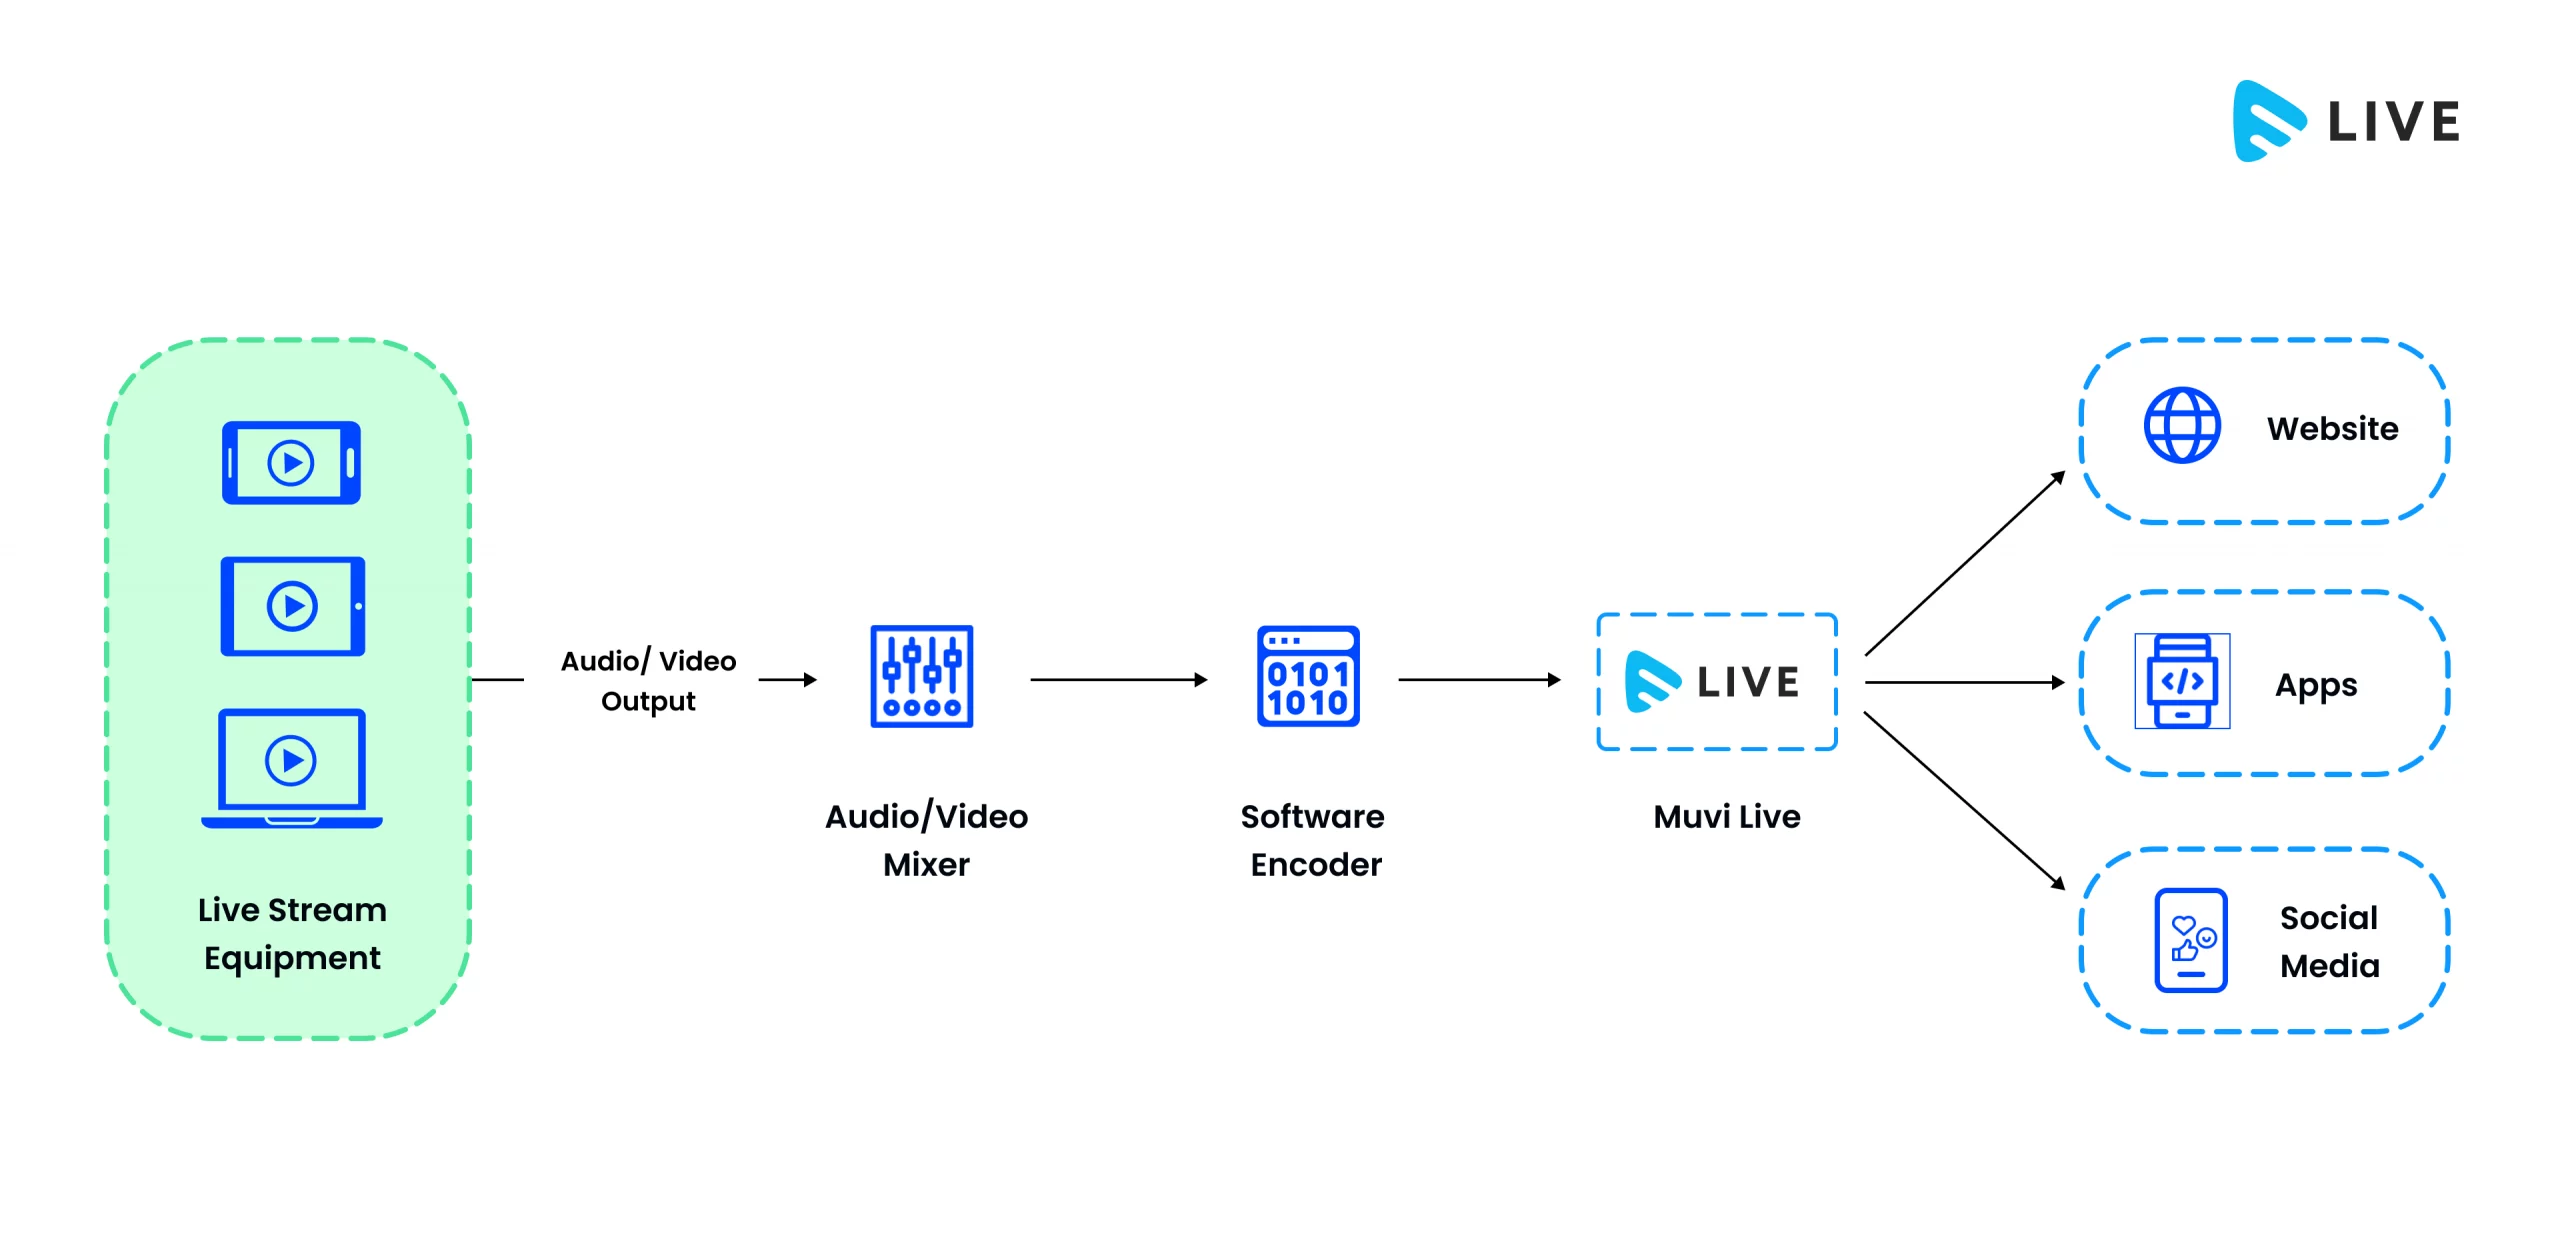 The live streaming equipment gives the Audio/Video output to the onsite A/V Mixer → A/V Mixer gives output to a software encoder (like OBS) → the output from the OBS is pushed to Muvi Live → From Muvi Live, you can embed live stream to any website/app/social media. 